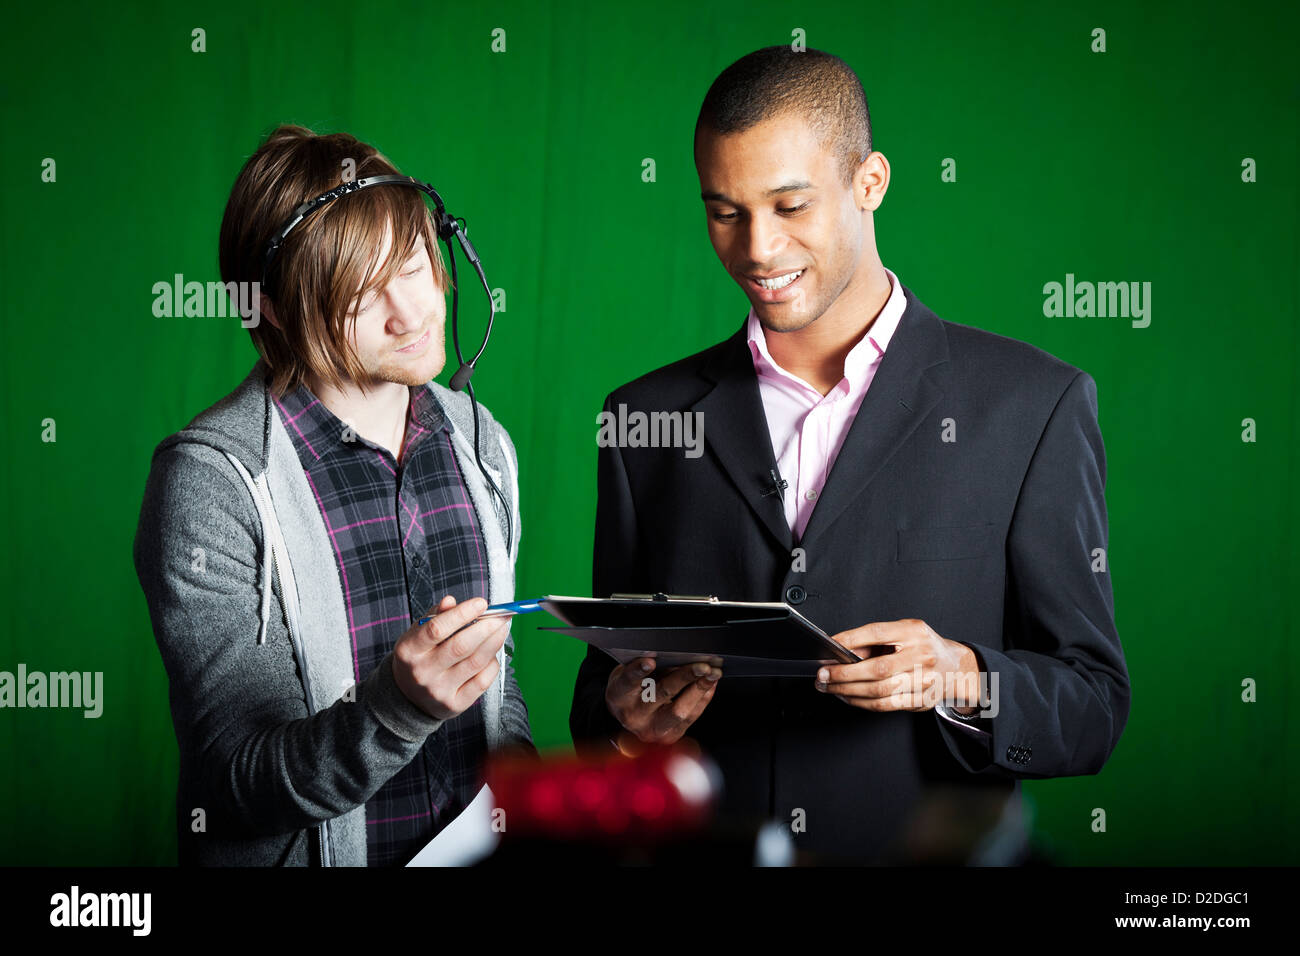 Floor manager runs through scripts with a Television Presenter in a green screen studio. Stock Photo